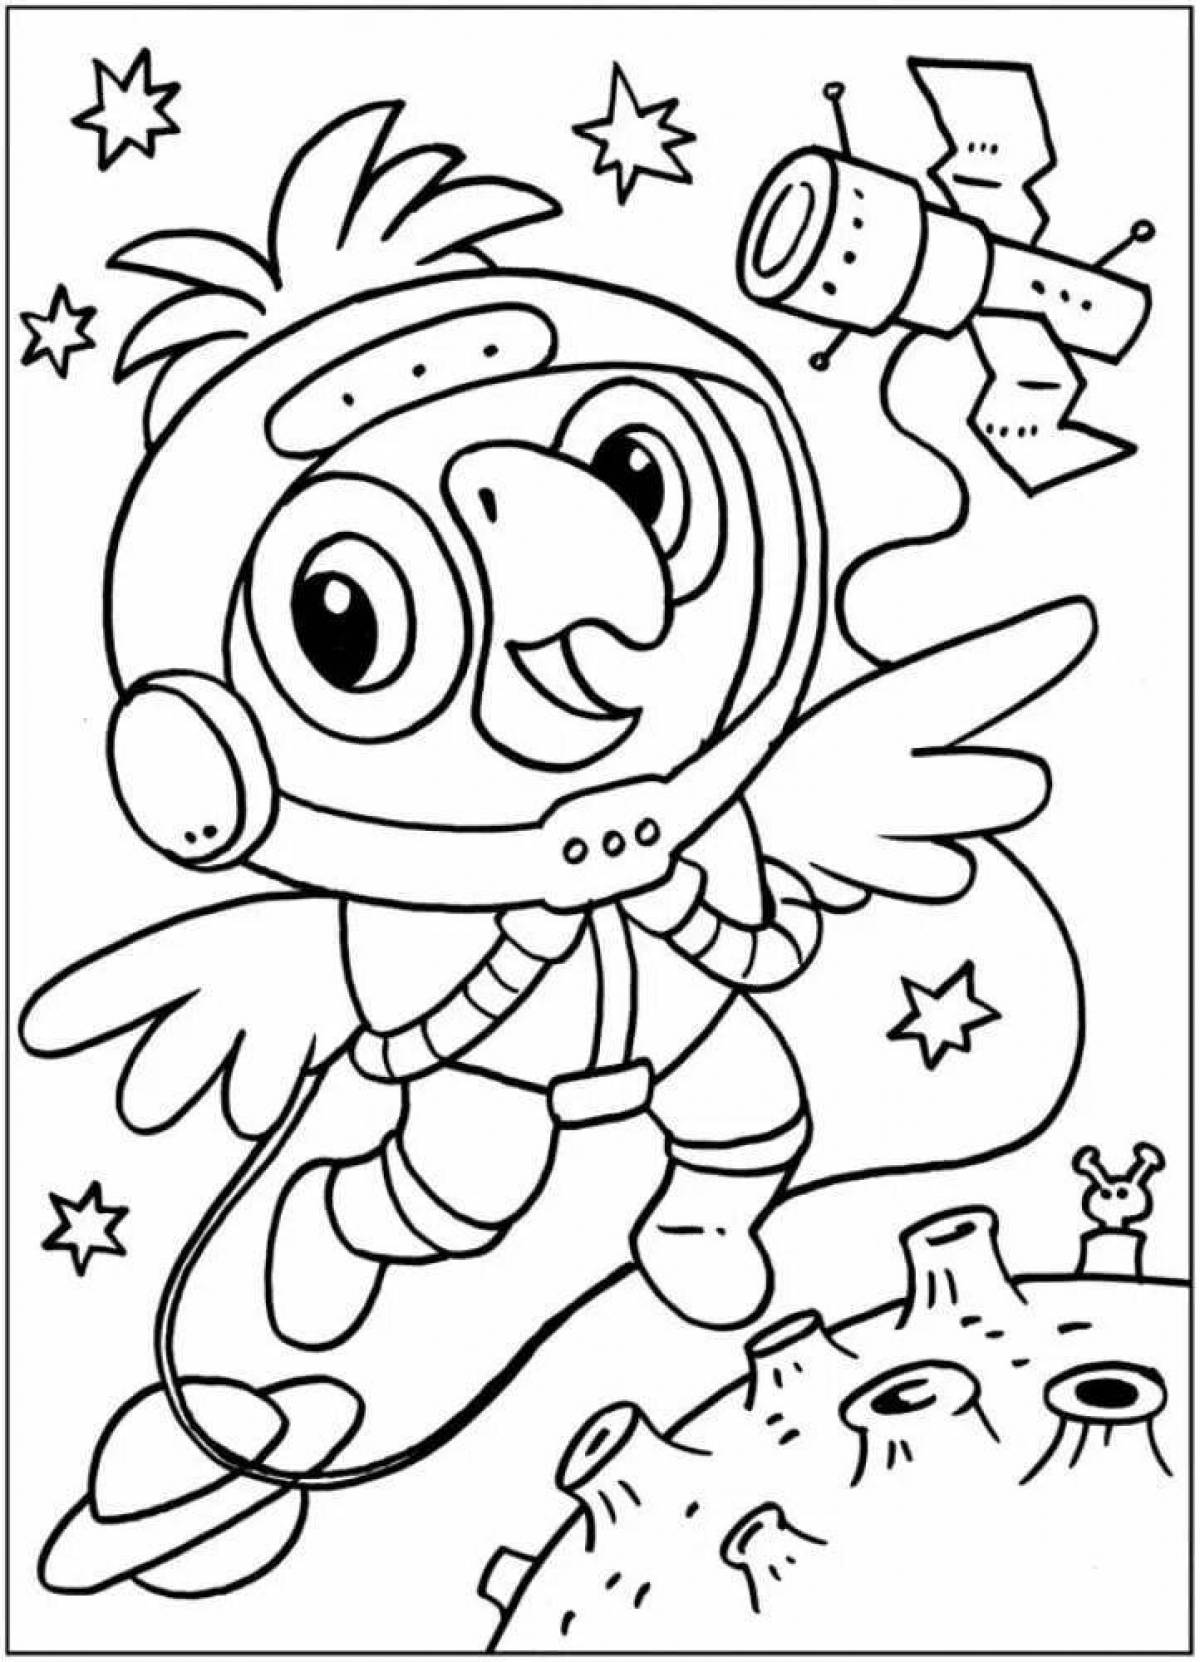 Colorful space cartoon coloring book